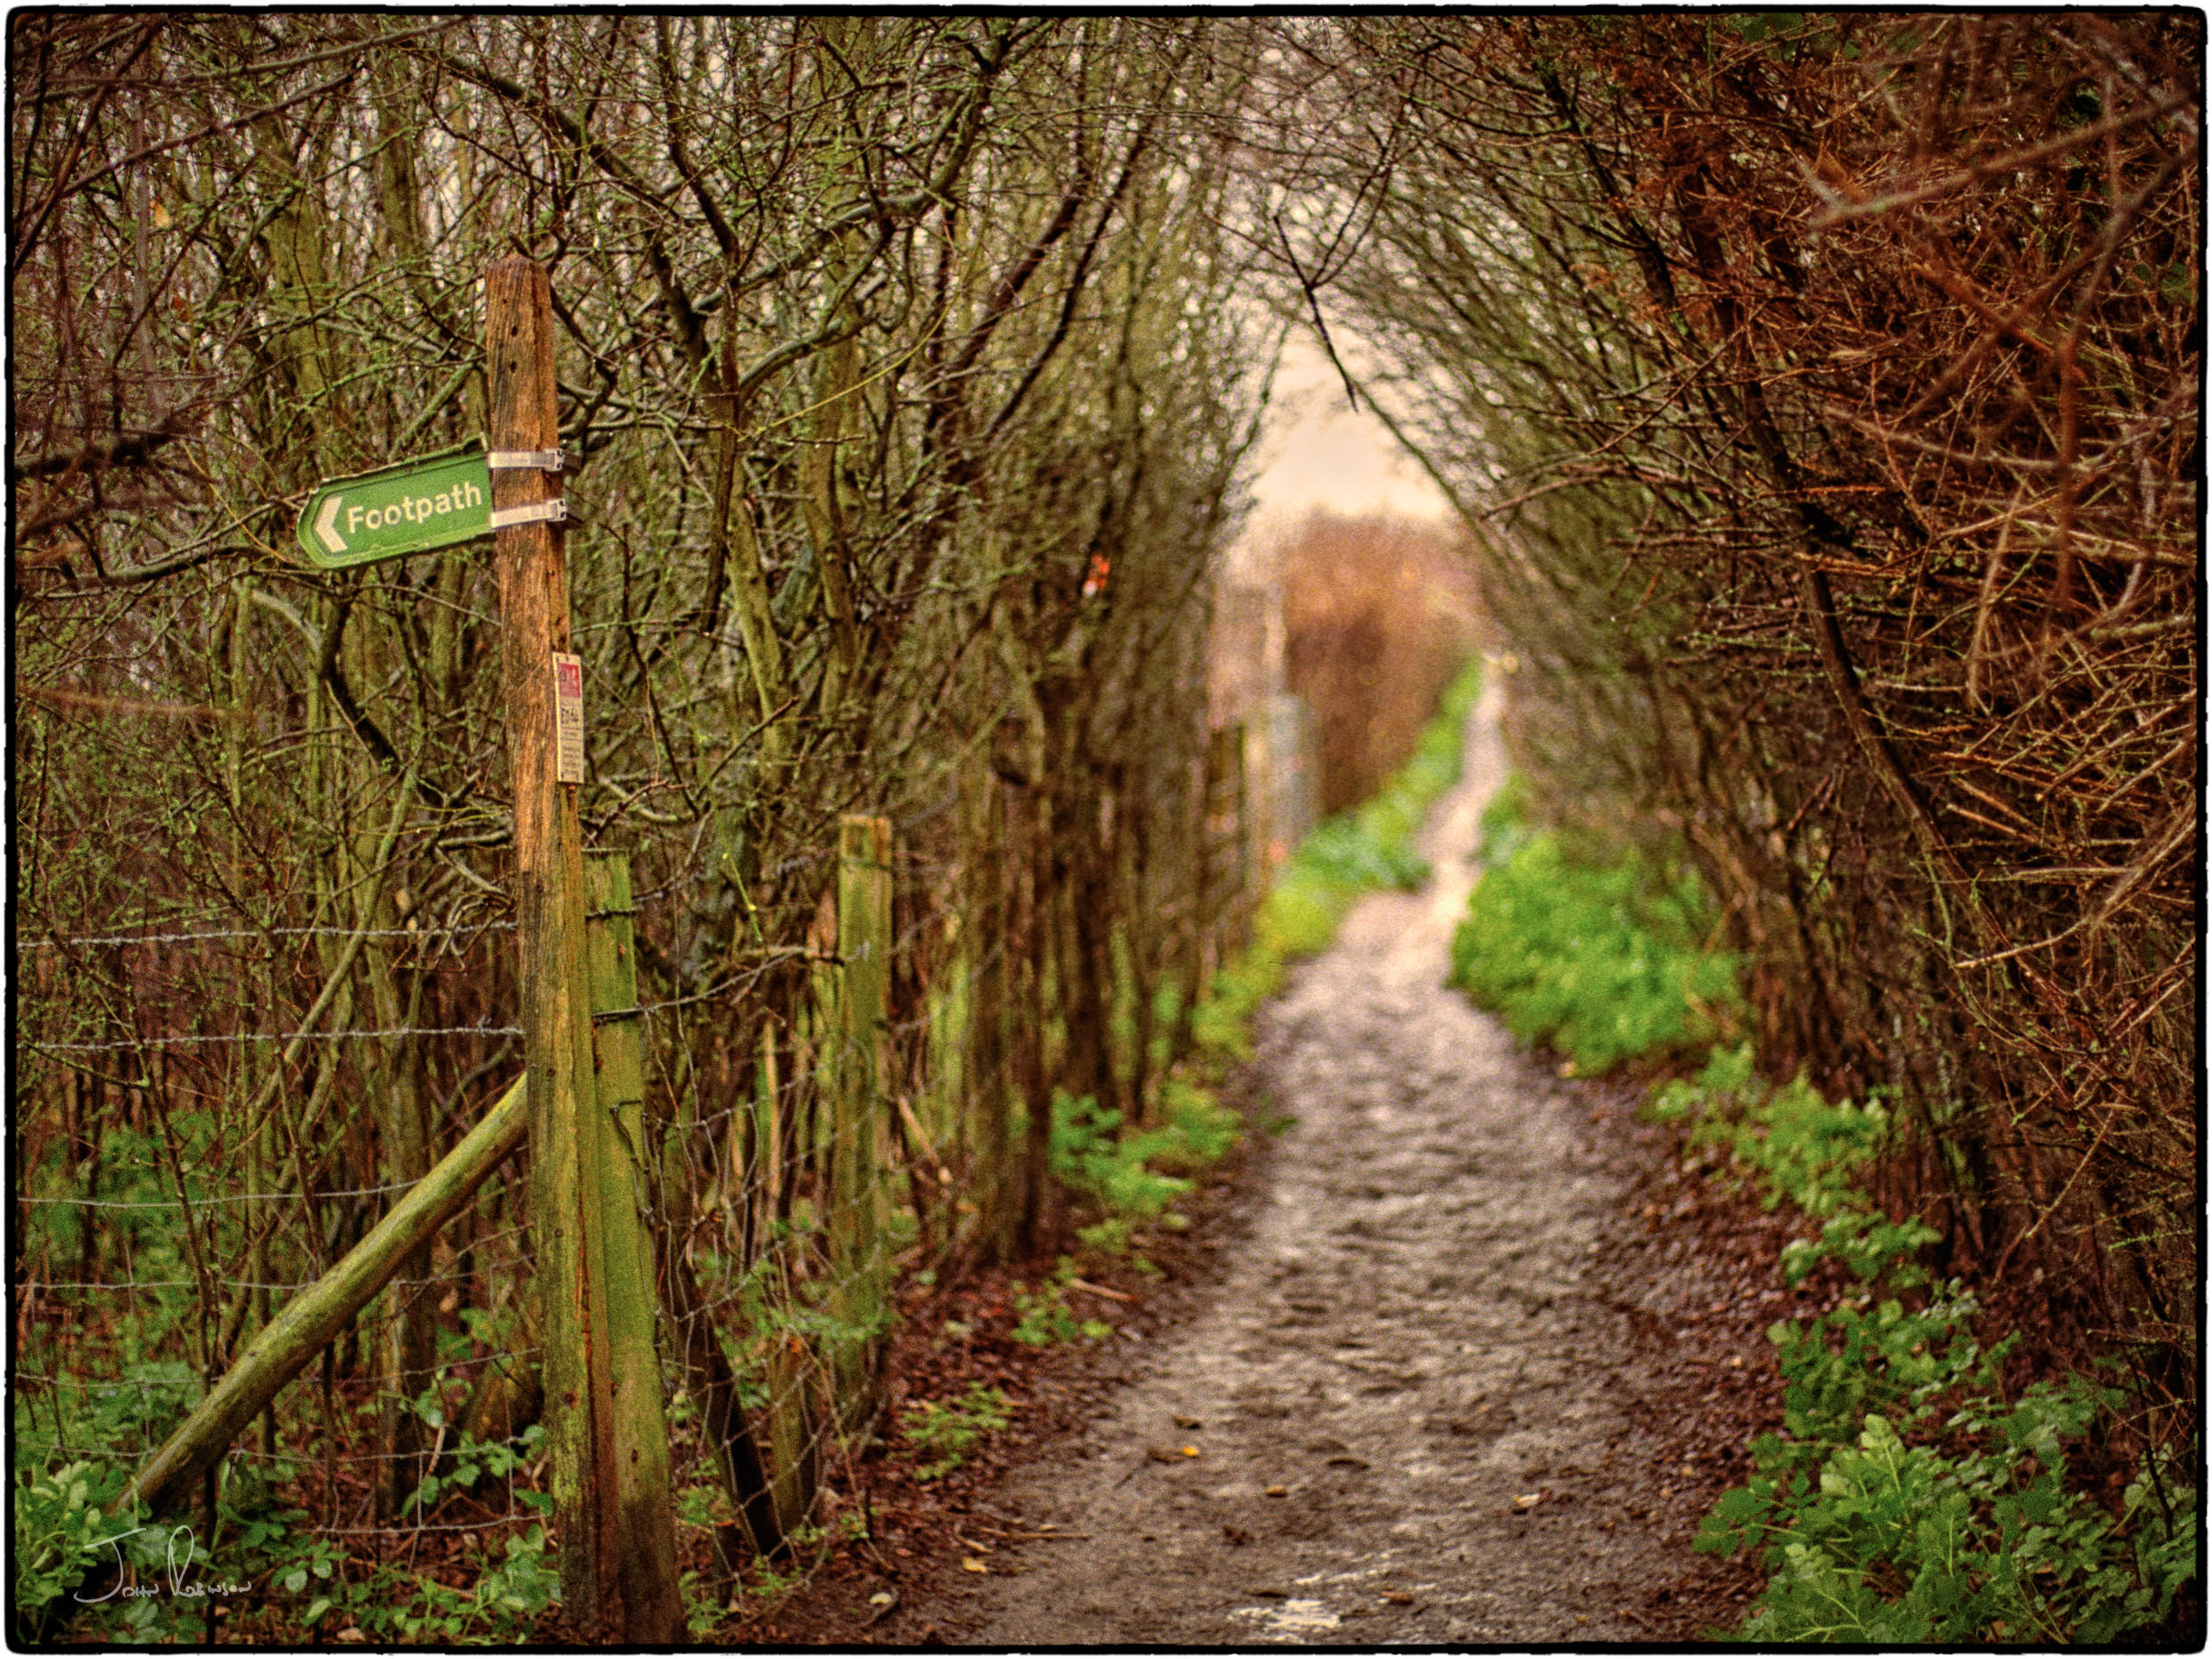 English Oak footpath in winter, taken with a Leica R6.2 and Summilux-R-50 on Fujicolor 200